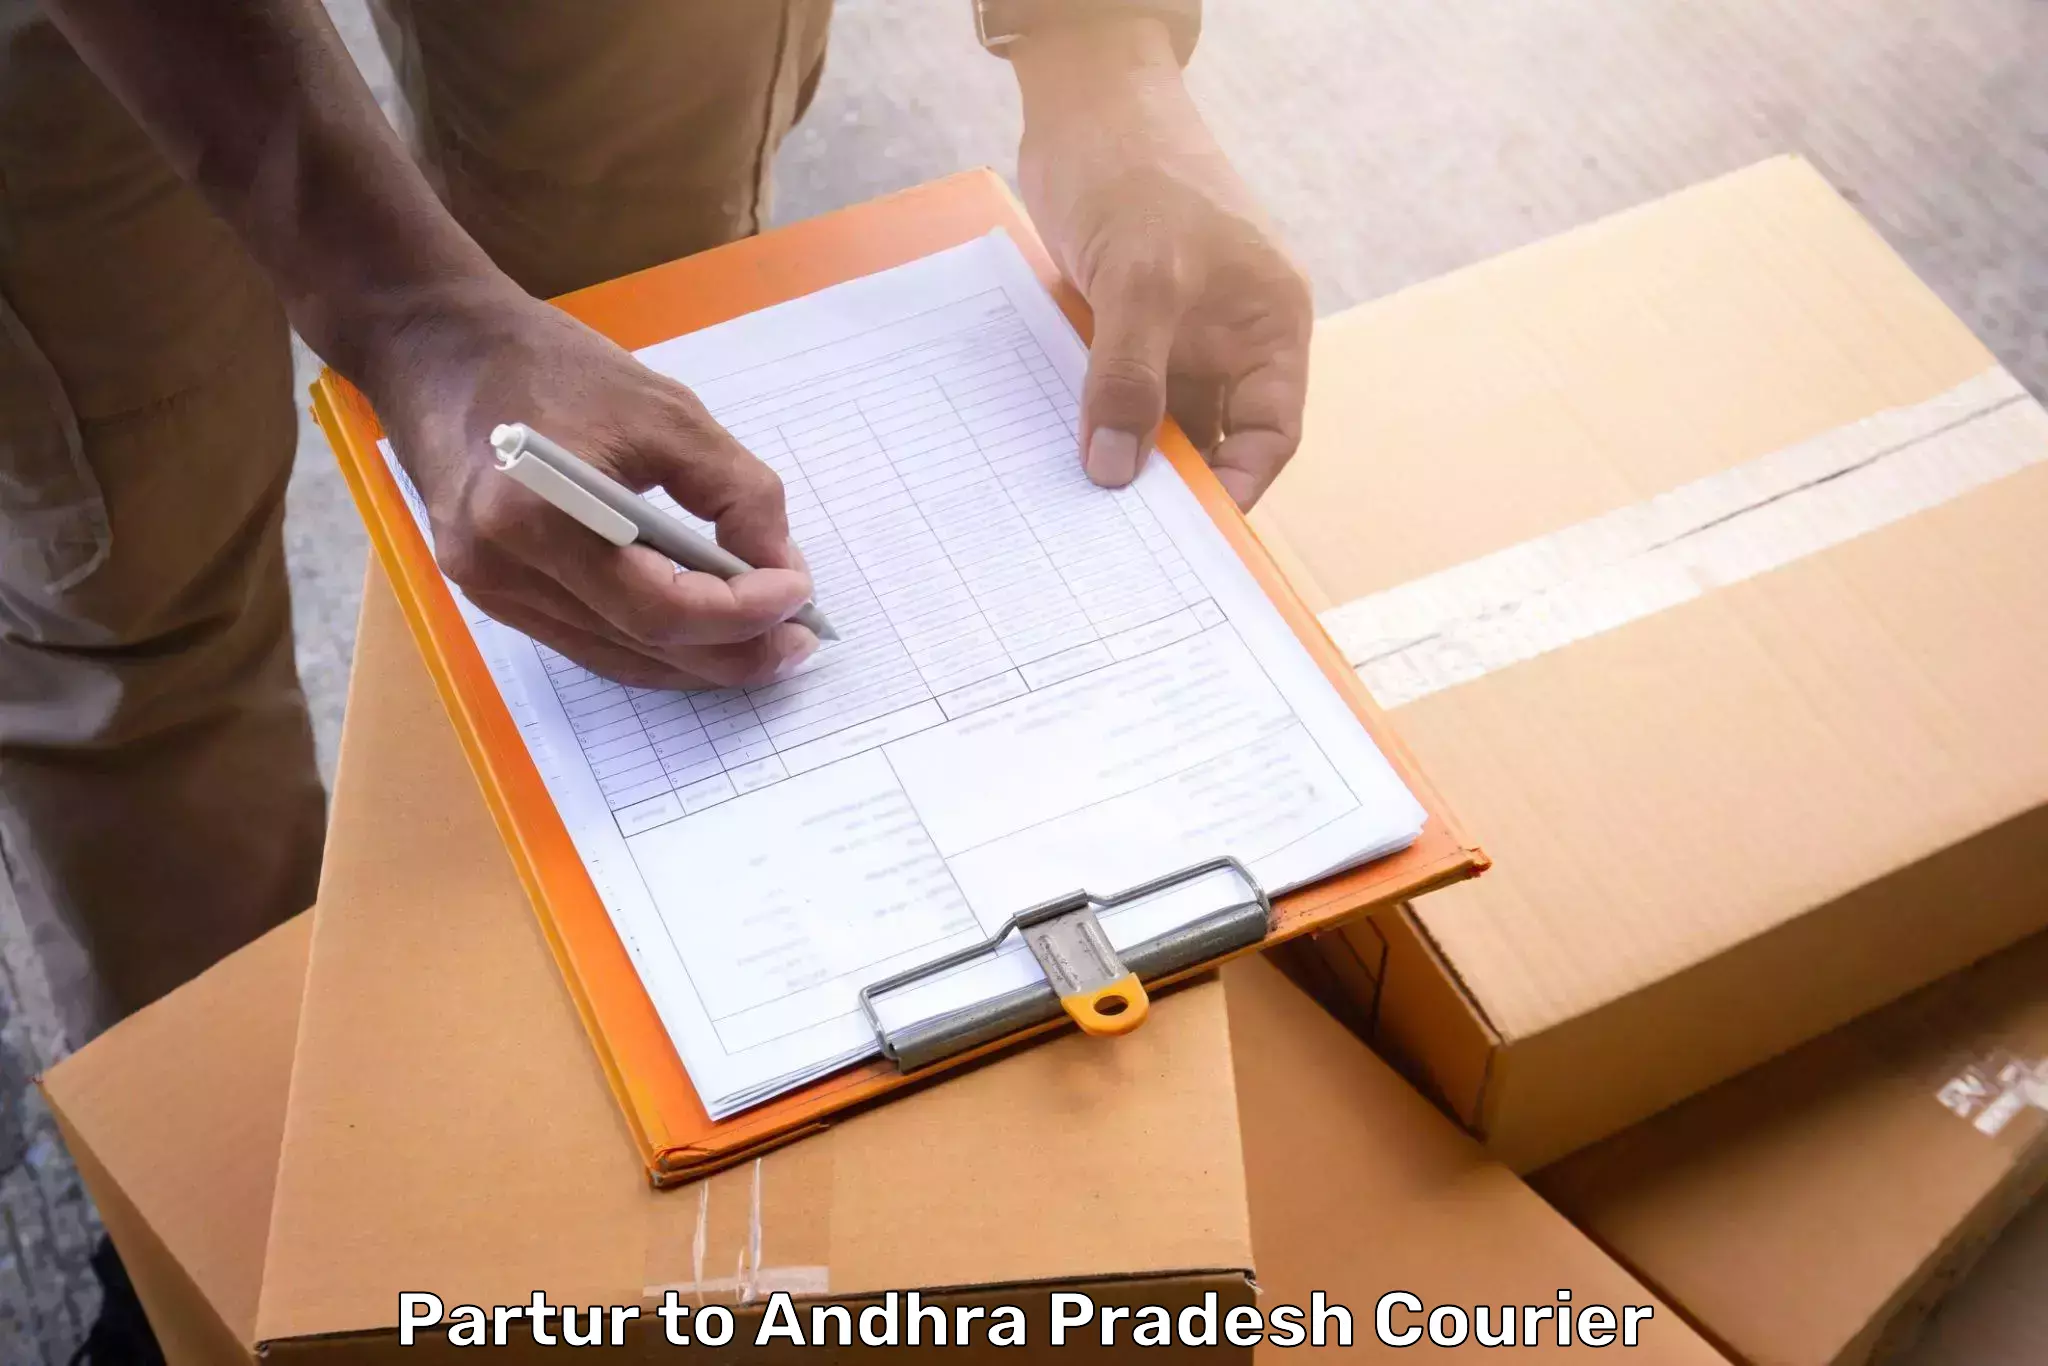 Luggage delivery providers Partur to Andhra Pradesh